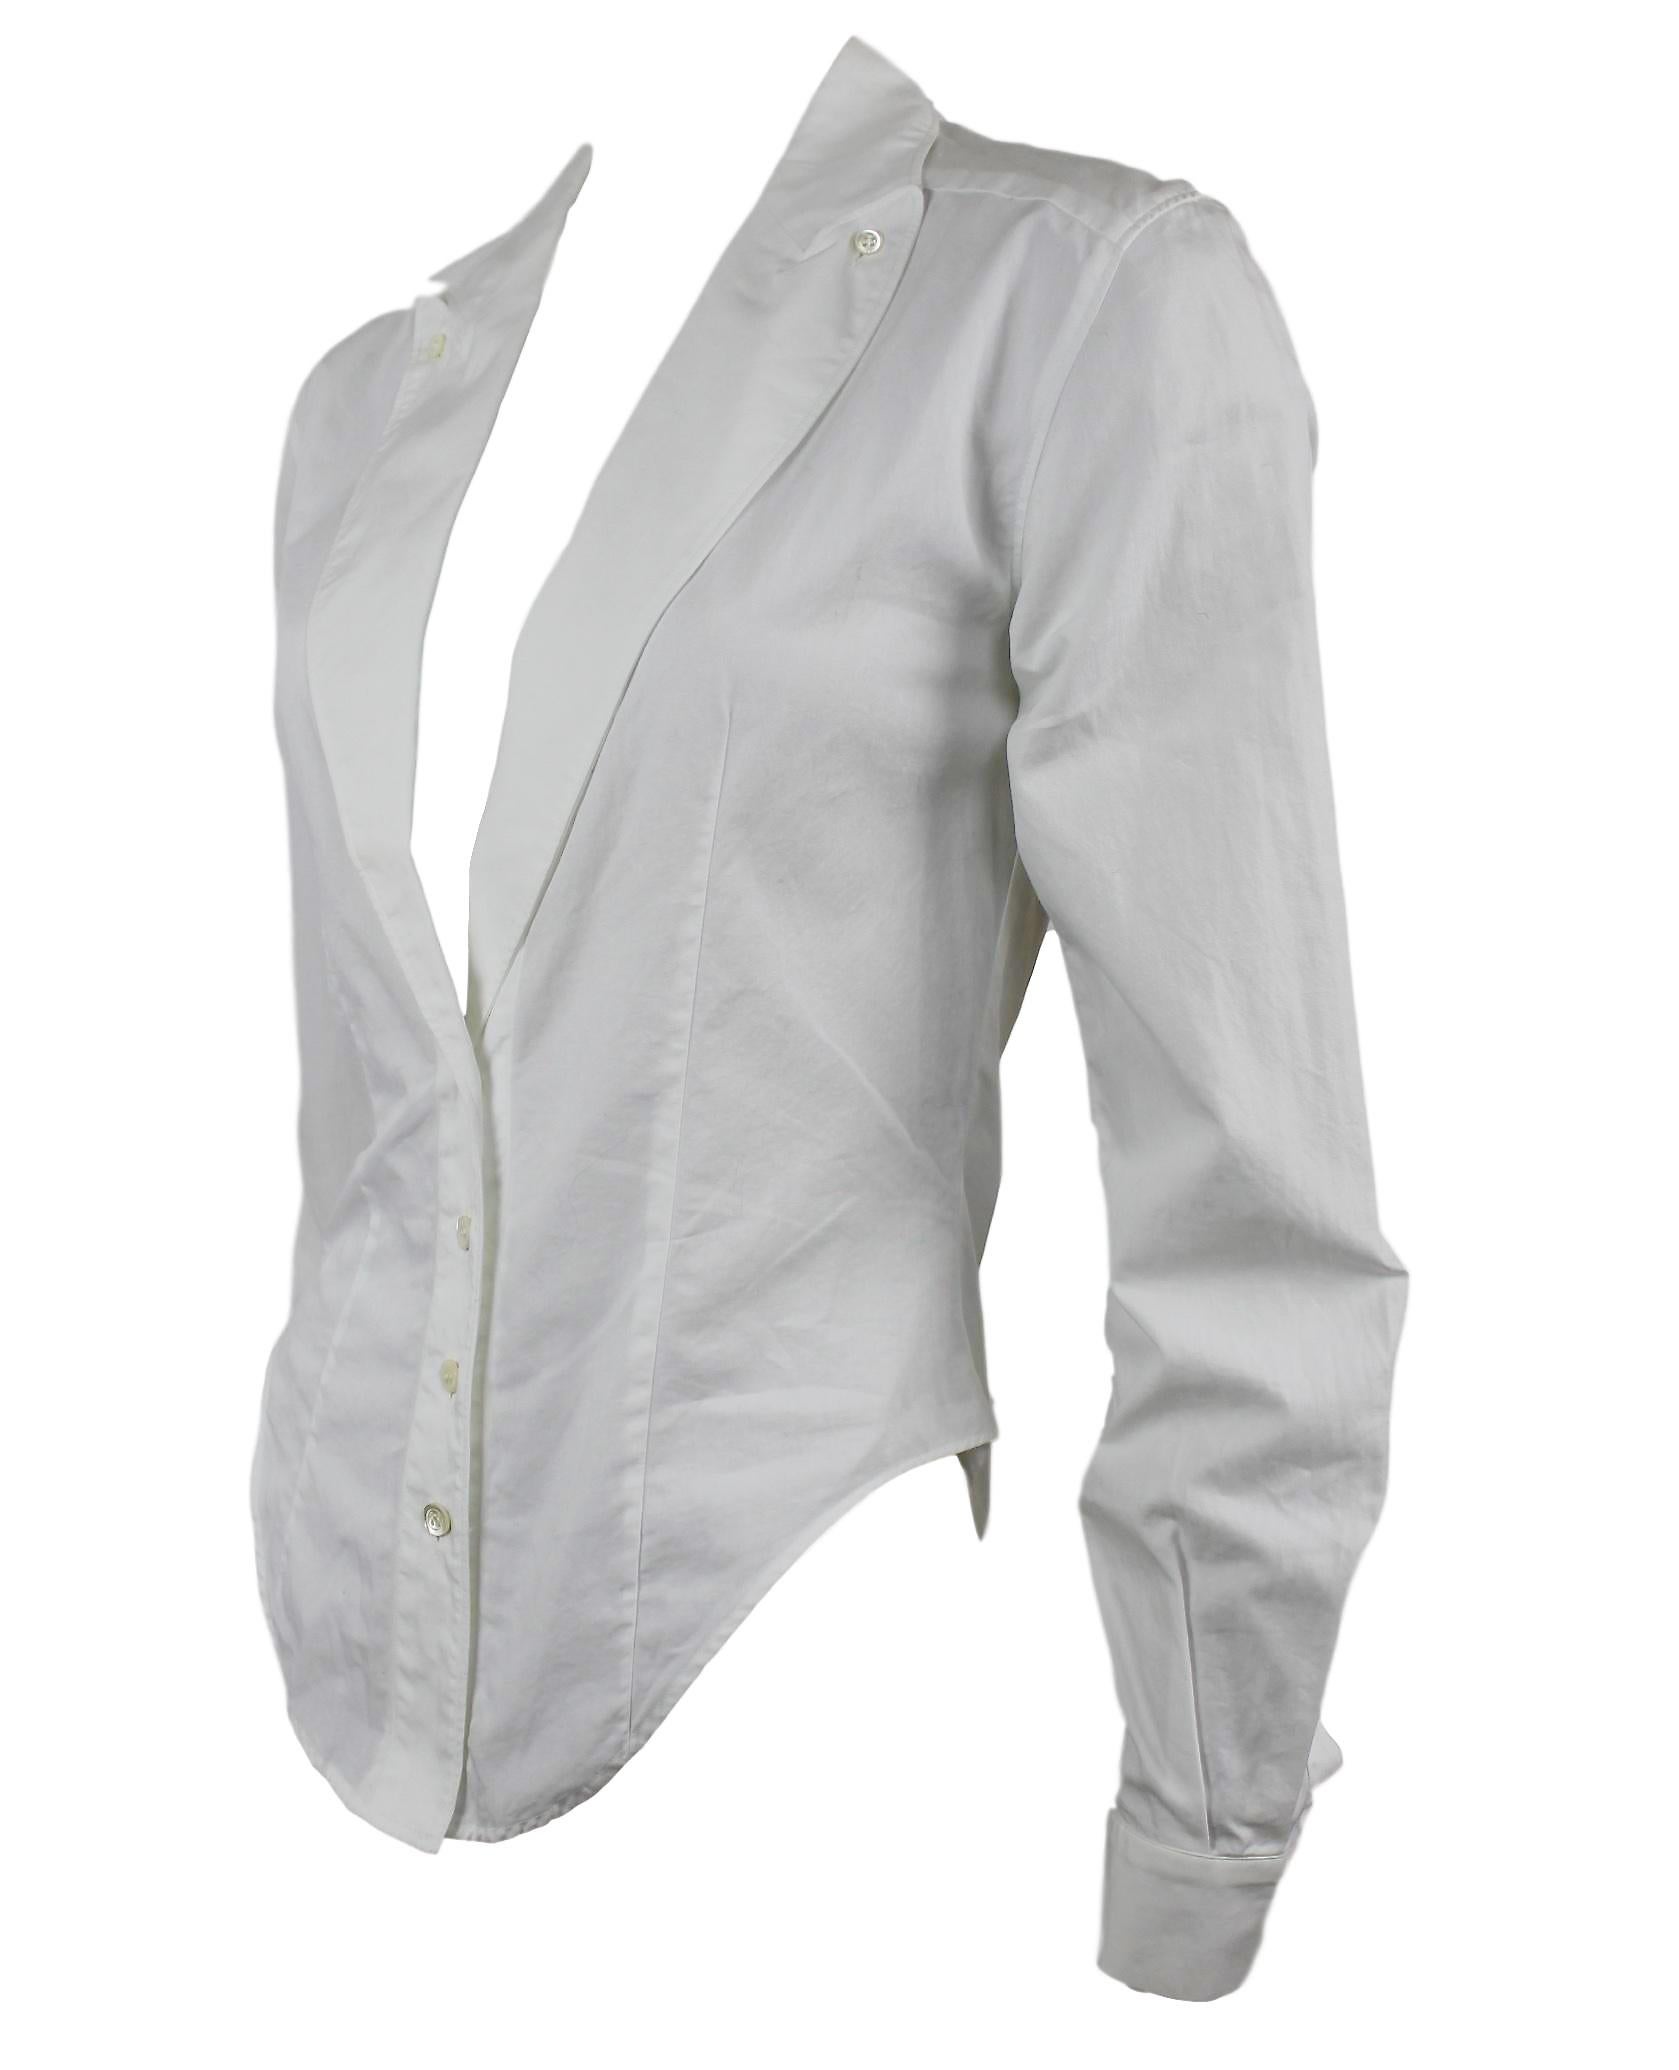 Alexander McQueen Early Collection Fitted Blouse/Jacket In Good Condition For Sale In Bath, GB